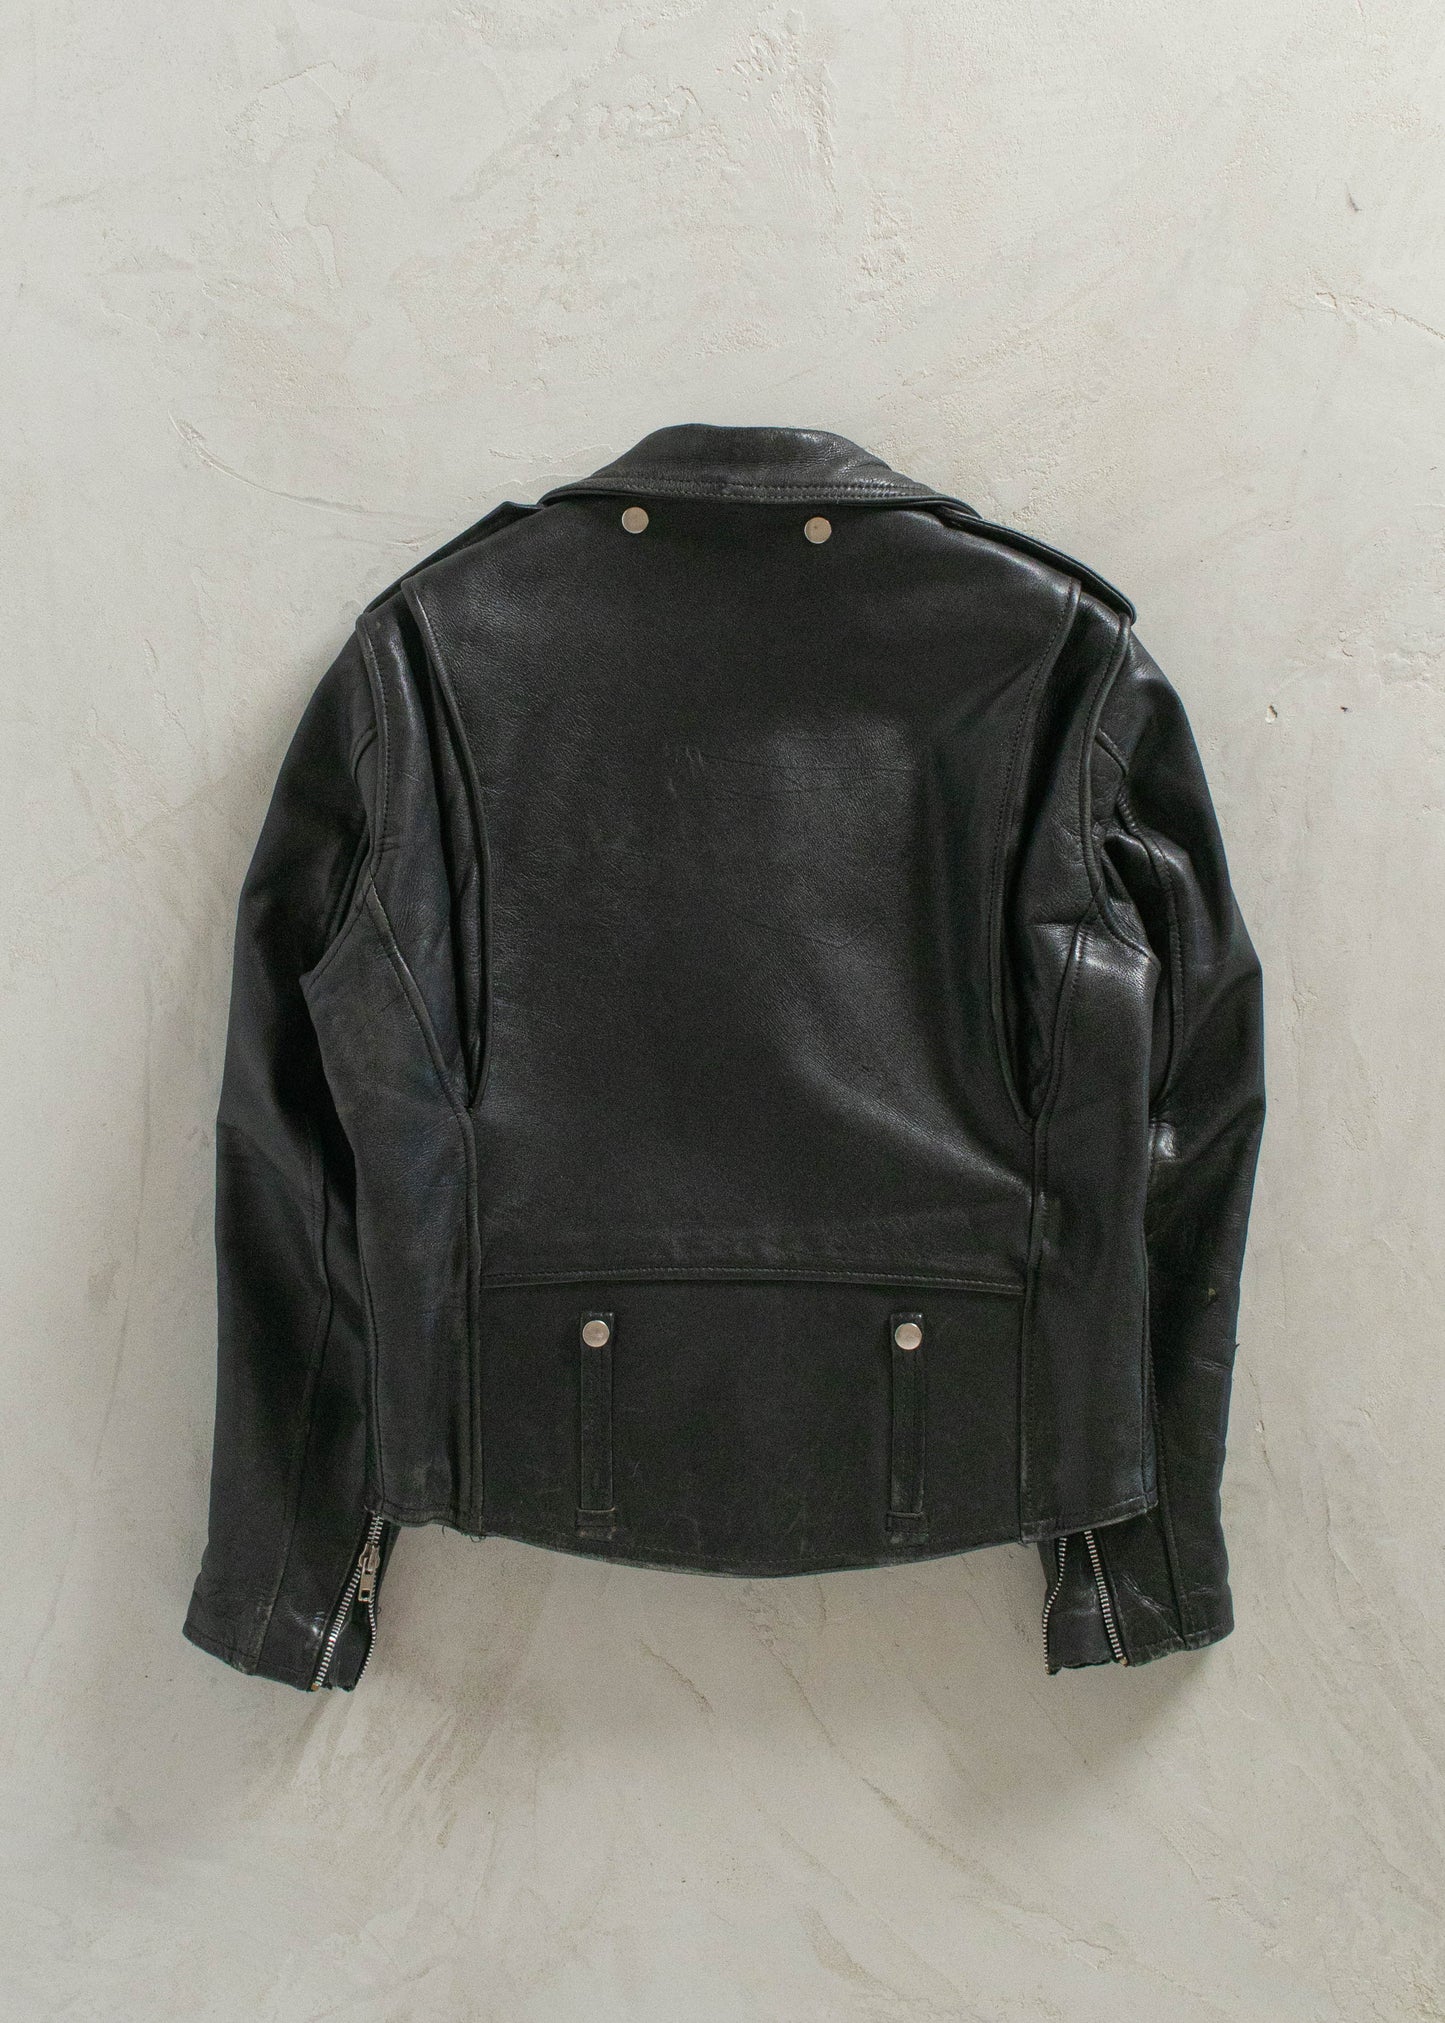 1980s Leather Moto Perfecto Jacket Size S/M